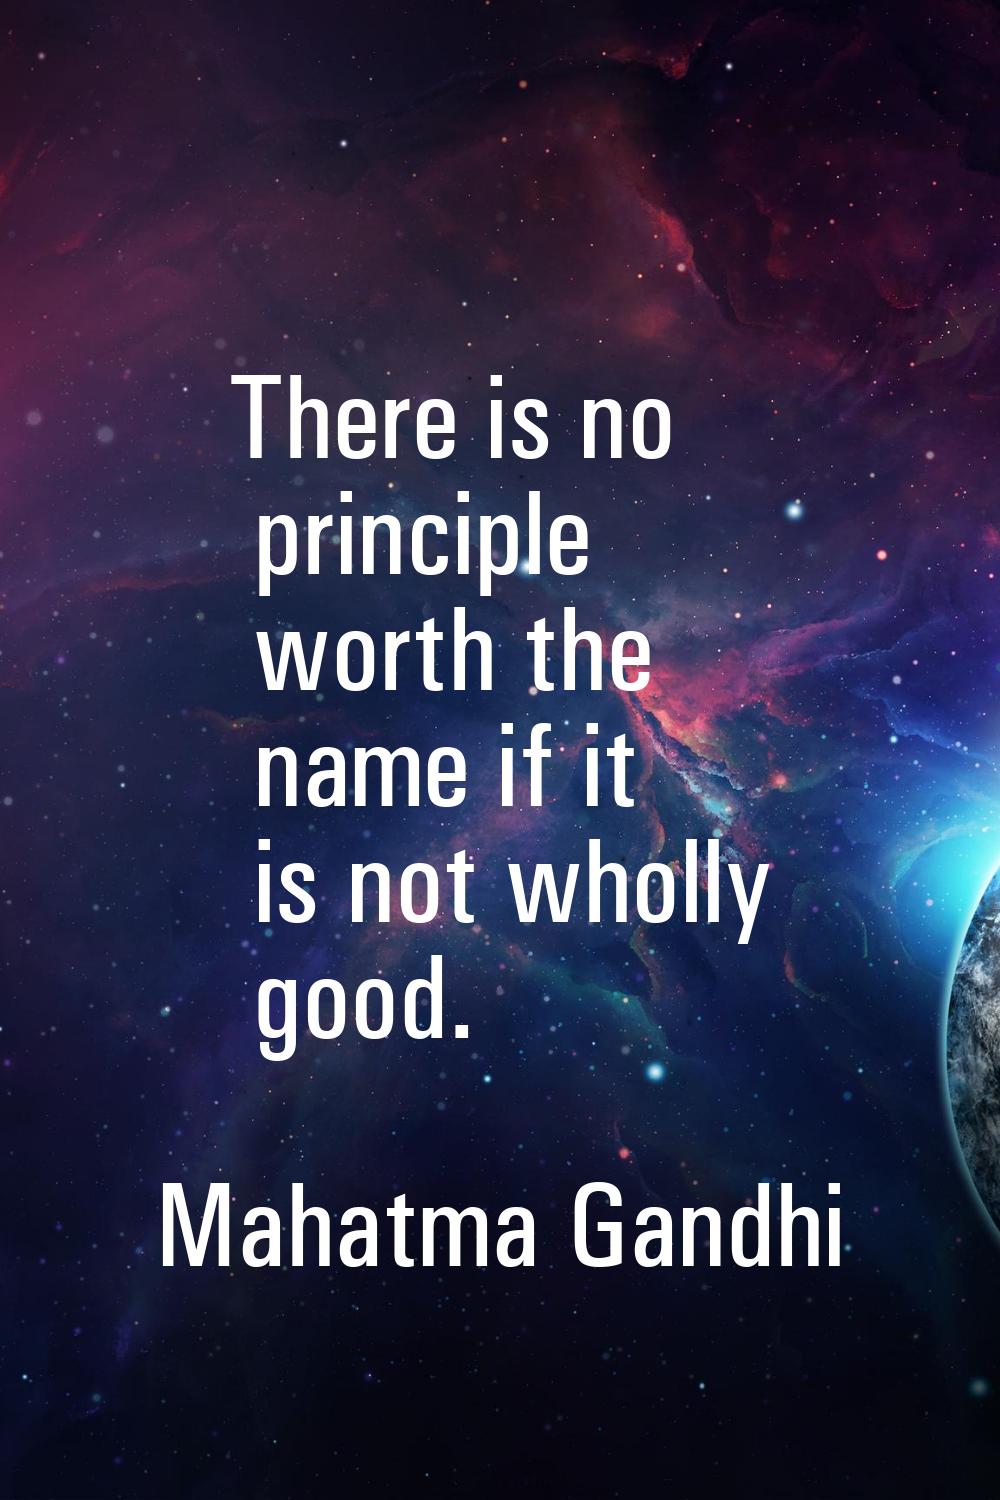 There is no principle worth the name if it is not wholly good.